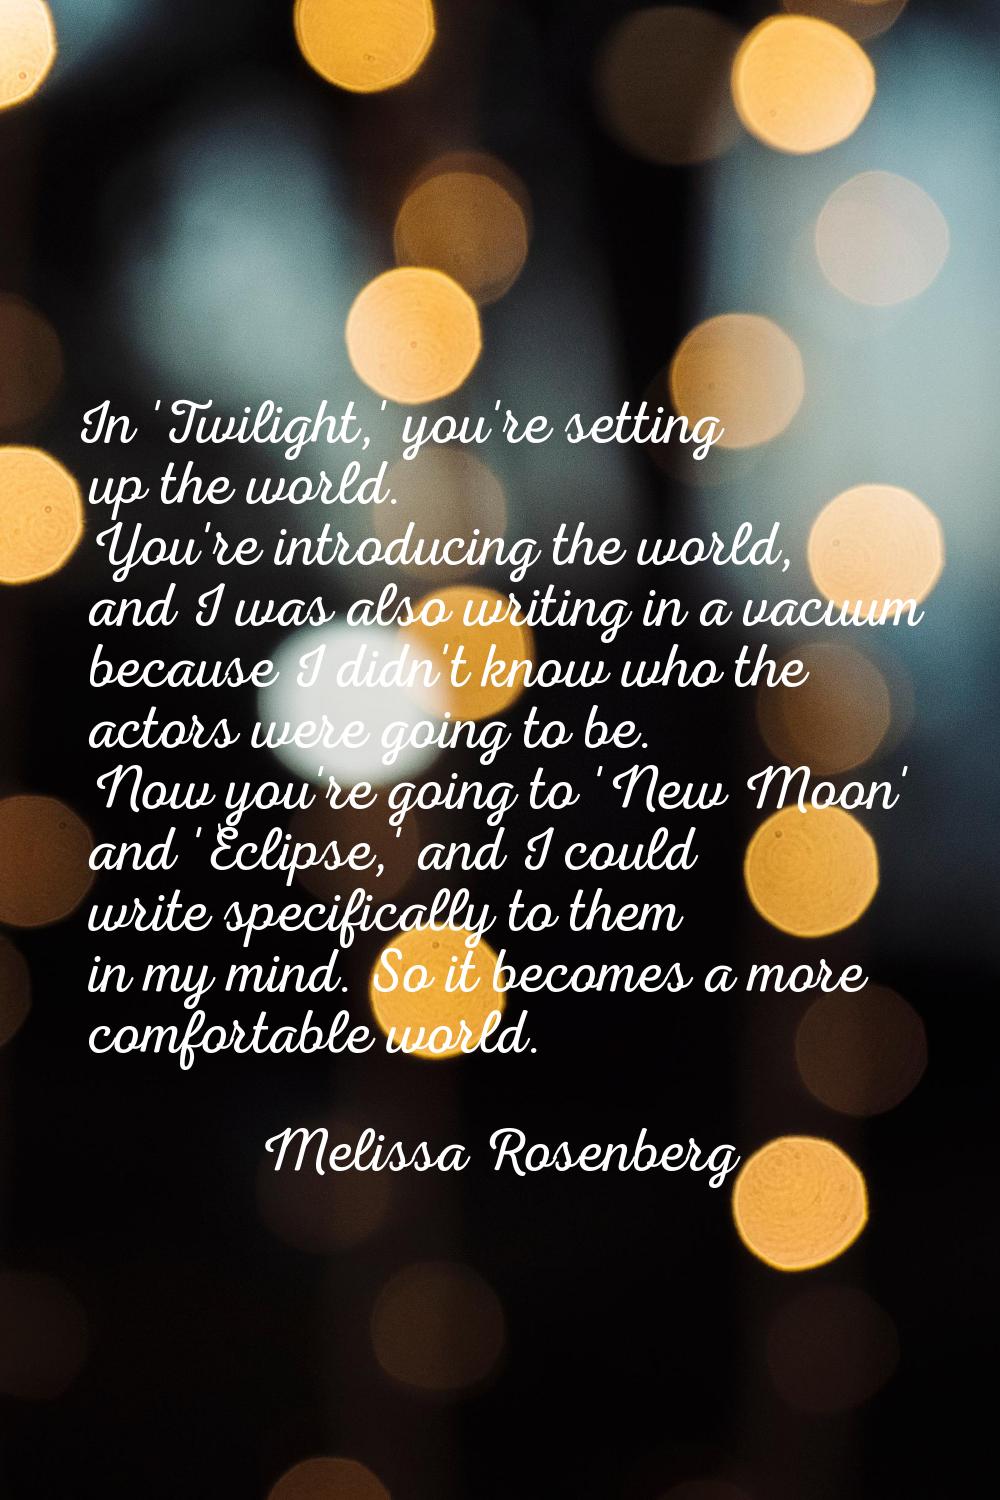 In 'Twilight,' you're setting up the world. You're introducing the world, and I was also writing in